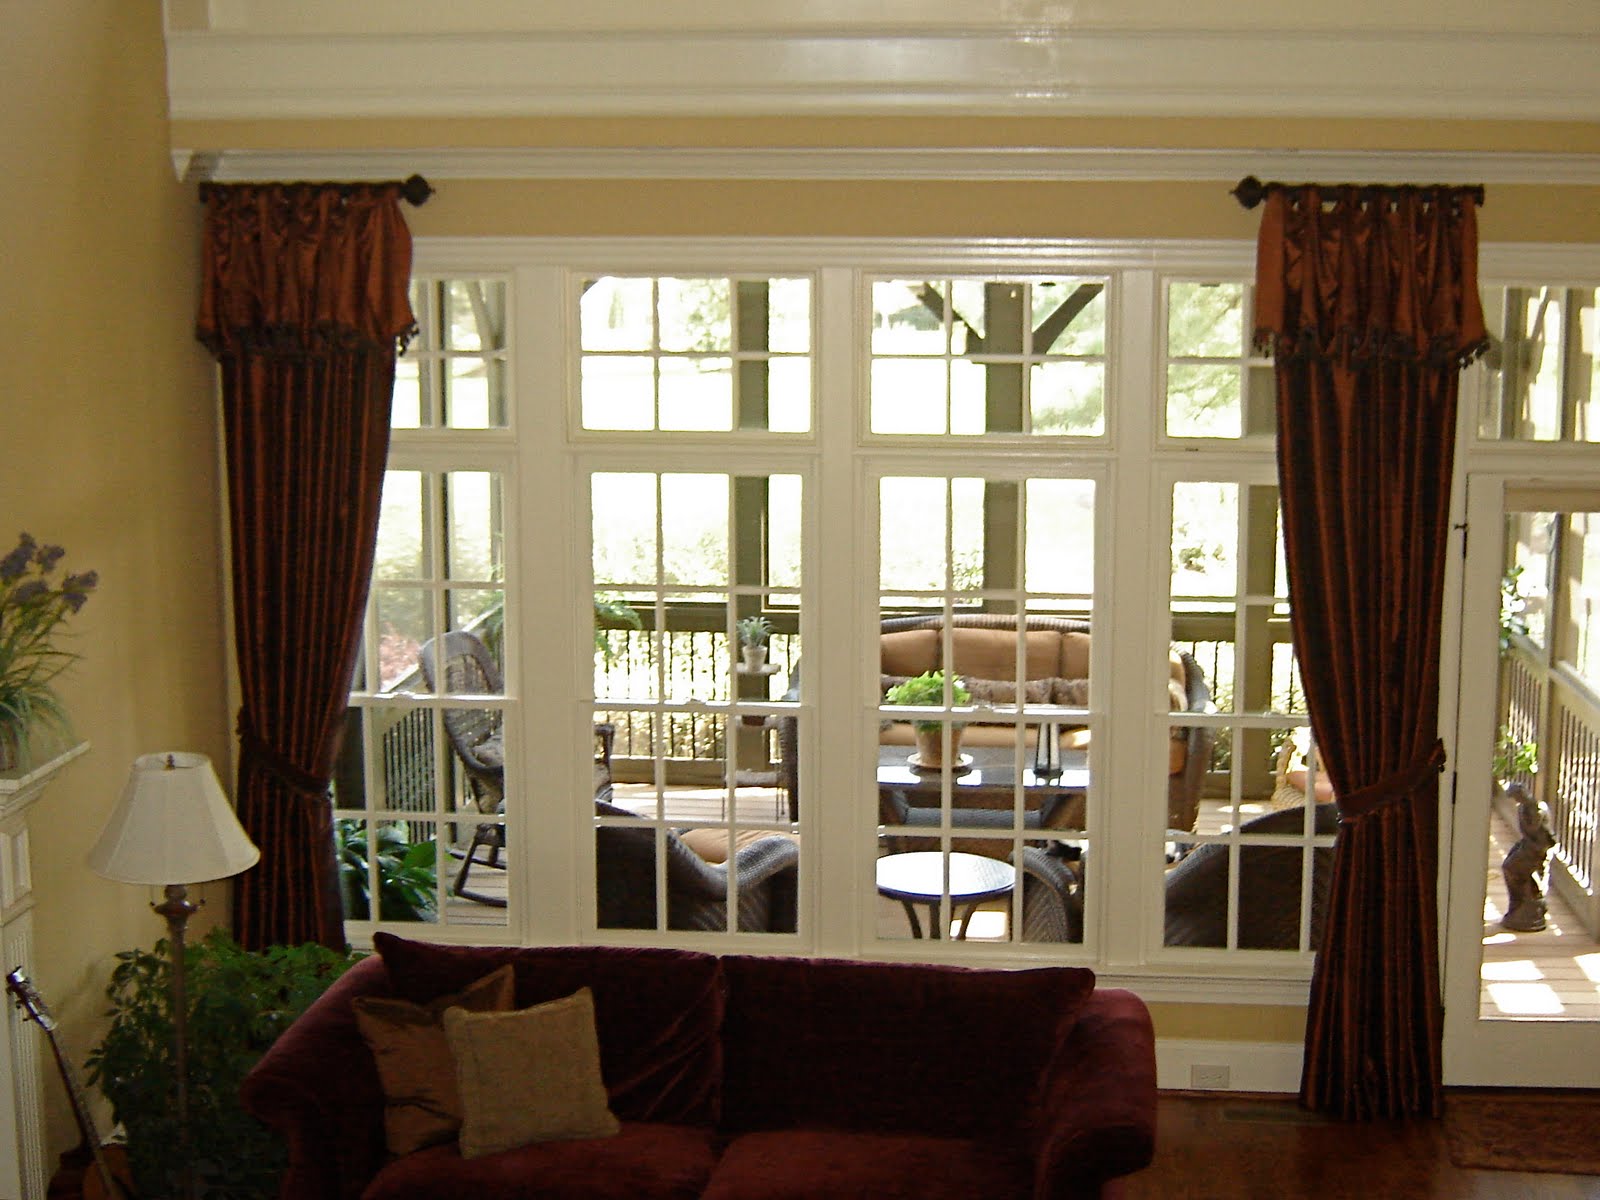 dark brown fabric curtains connected by glass windows with white ...